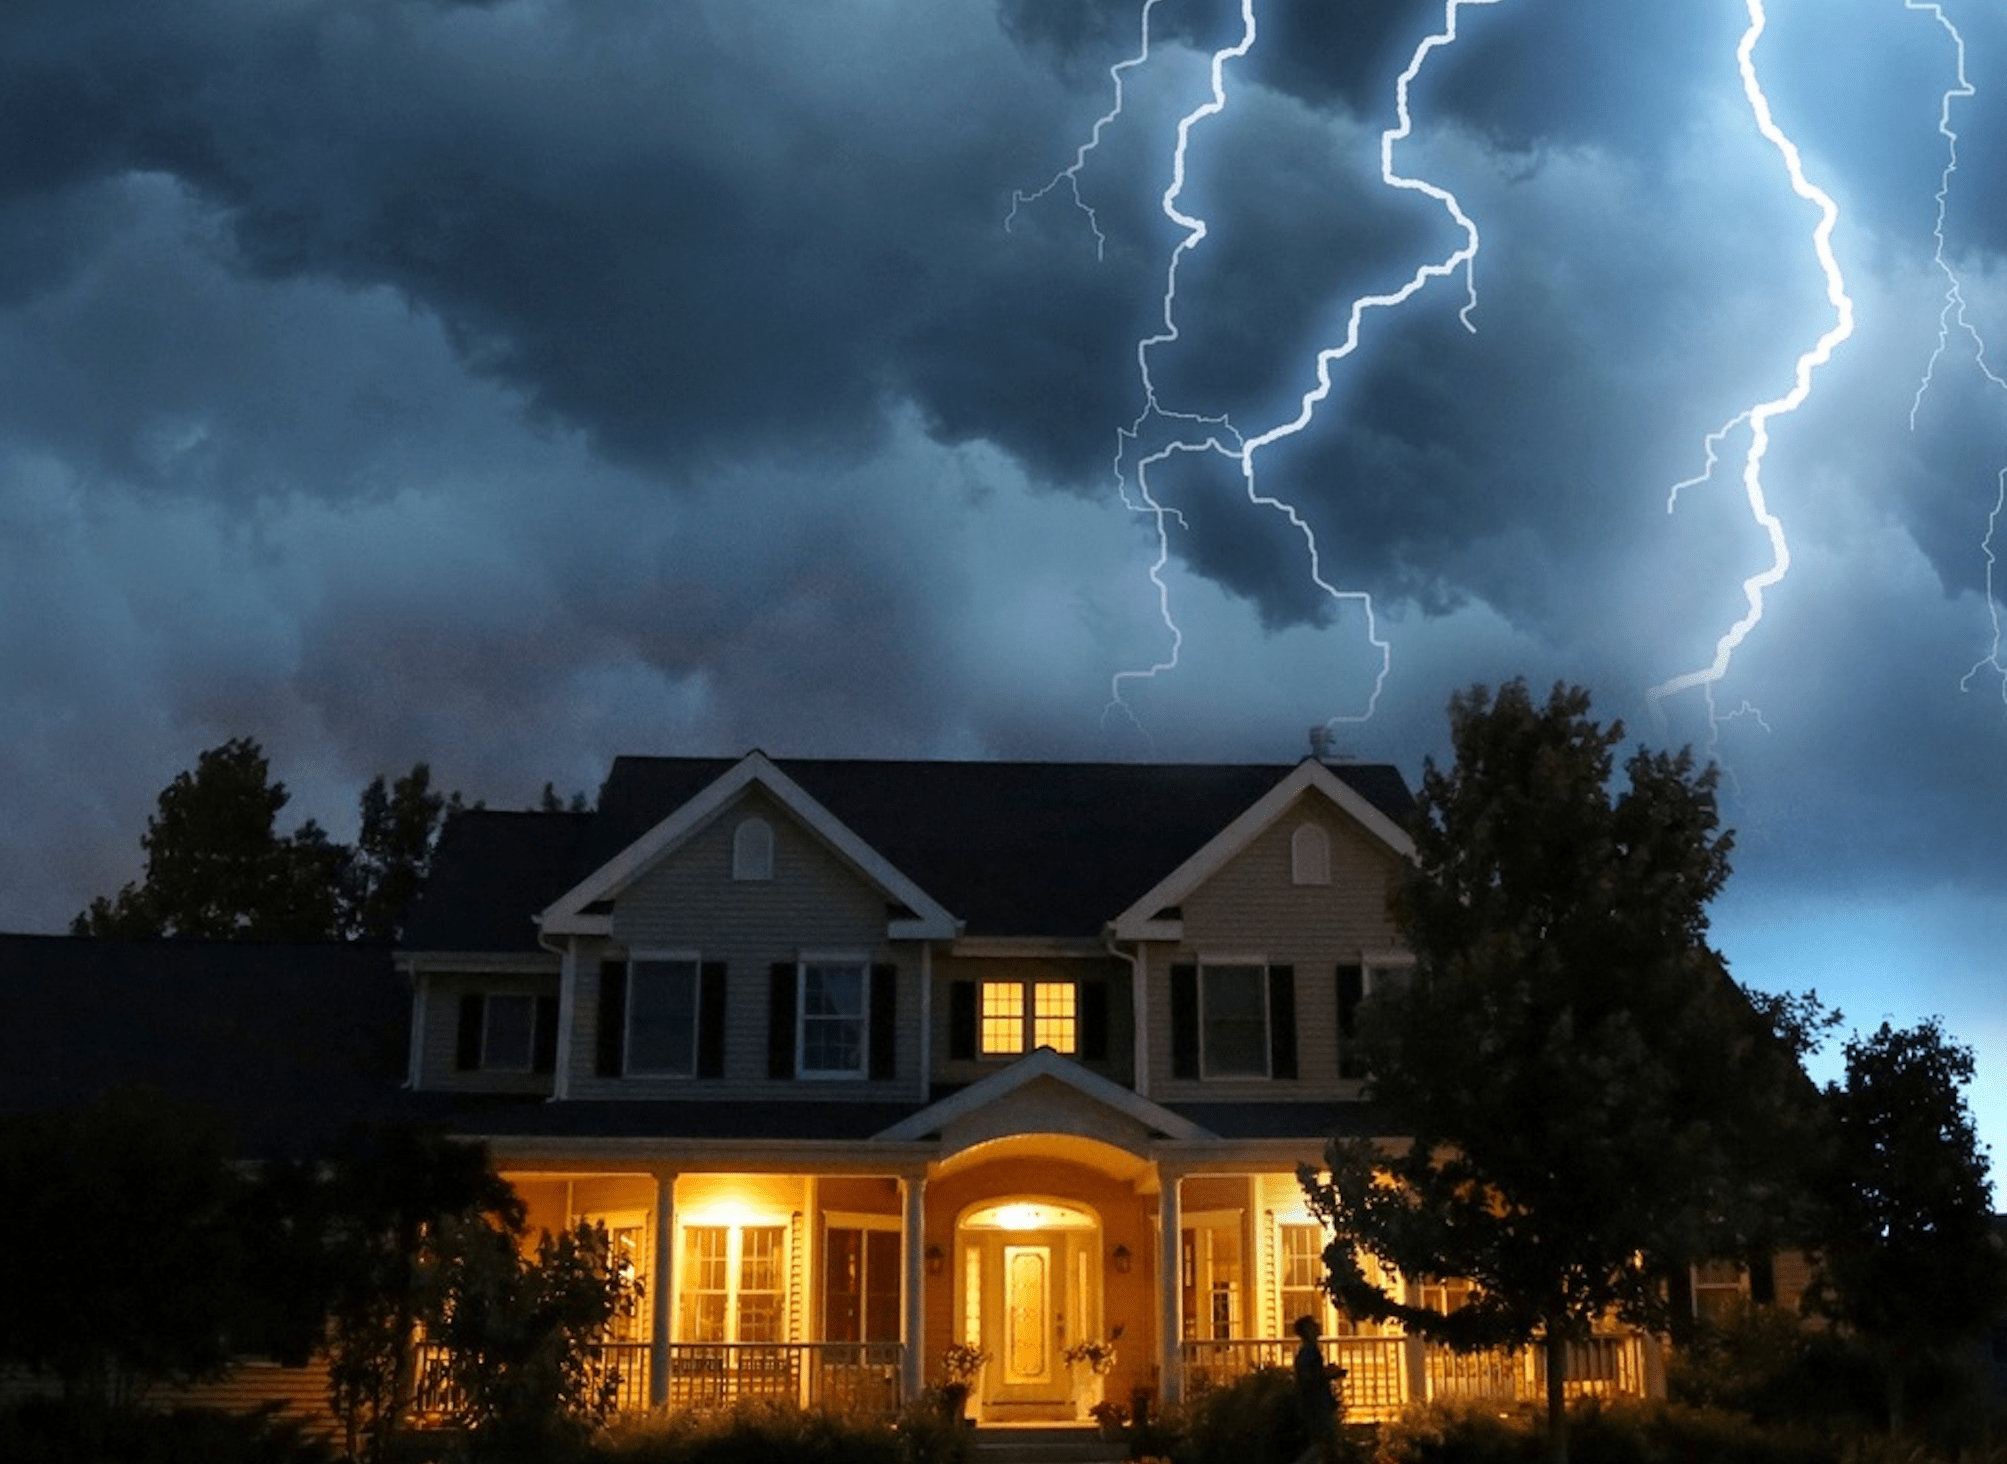 Thunderstorm above Middle Tennessee home at night